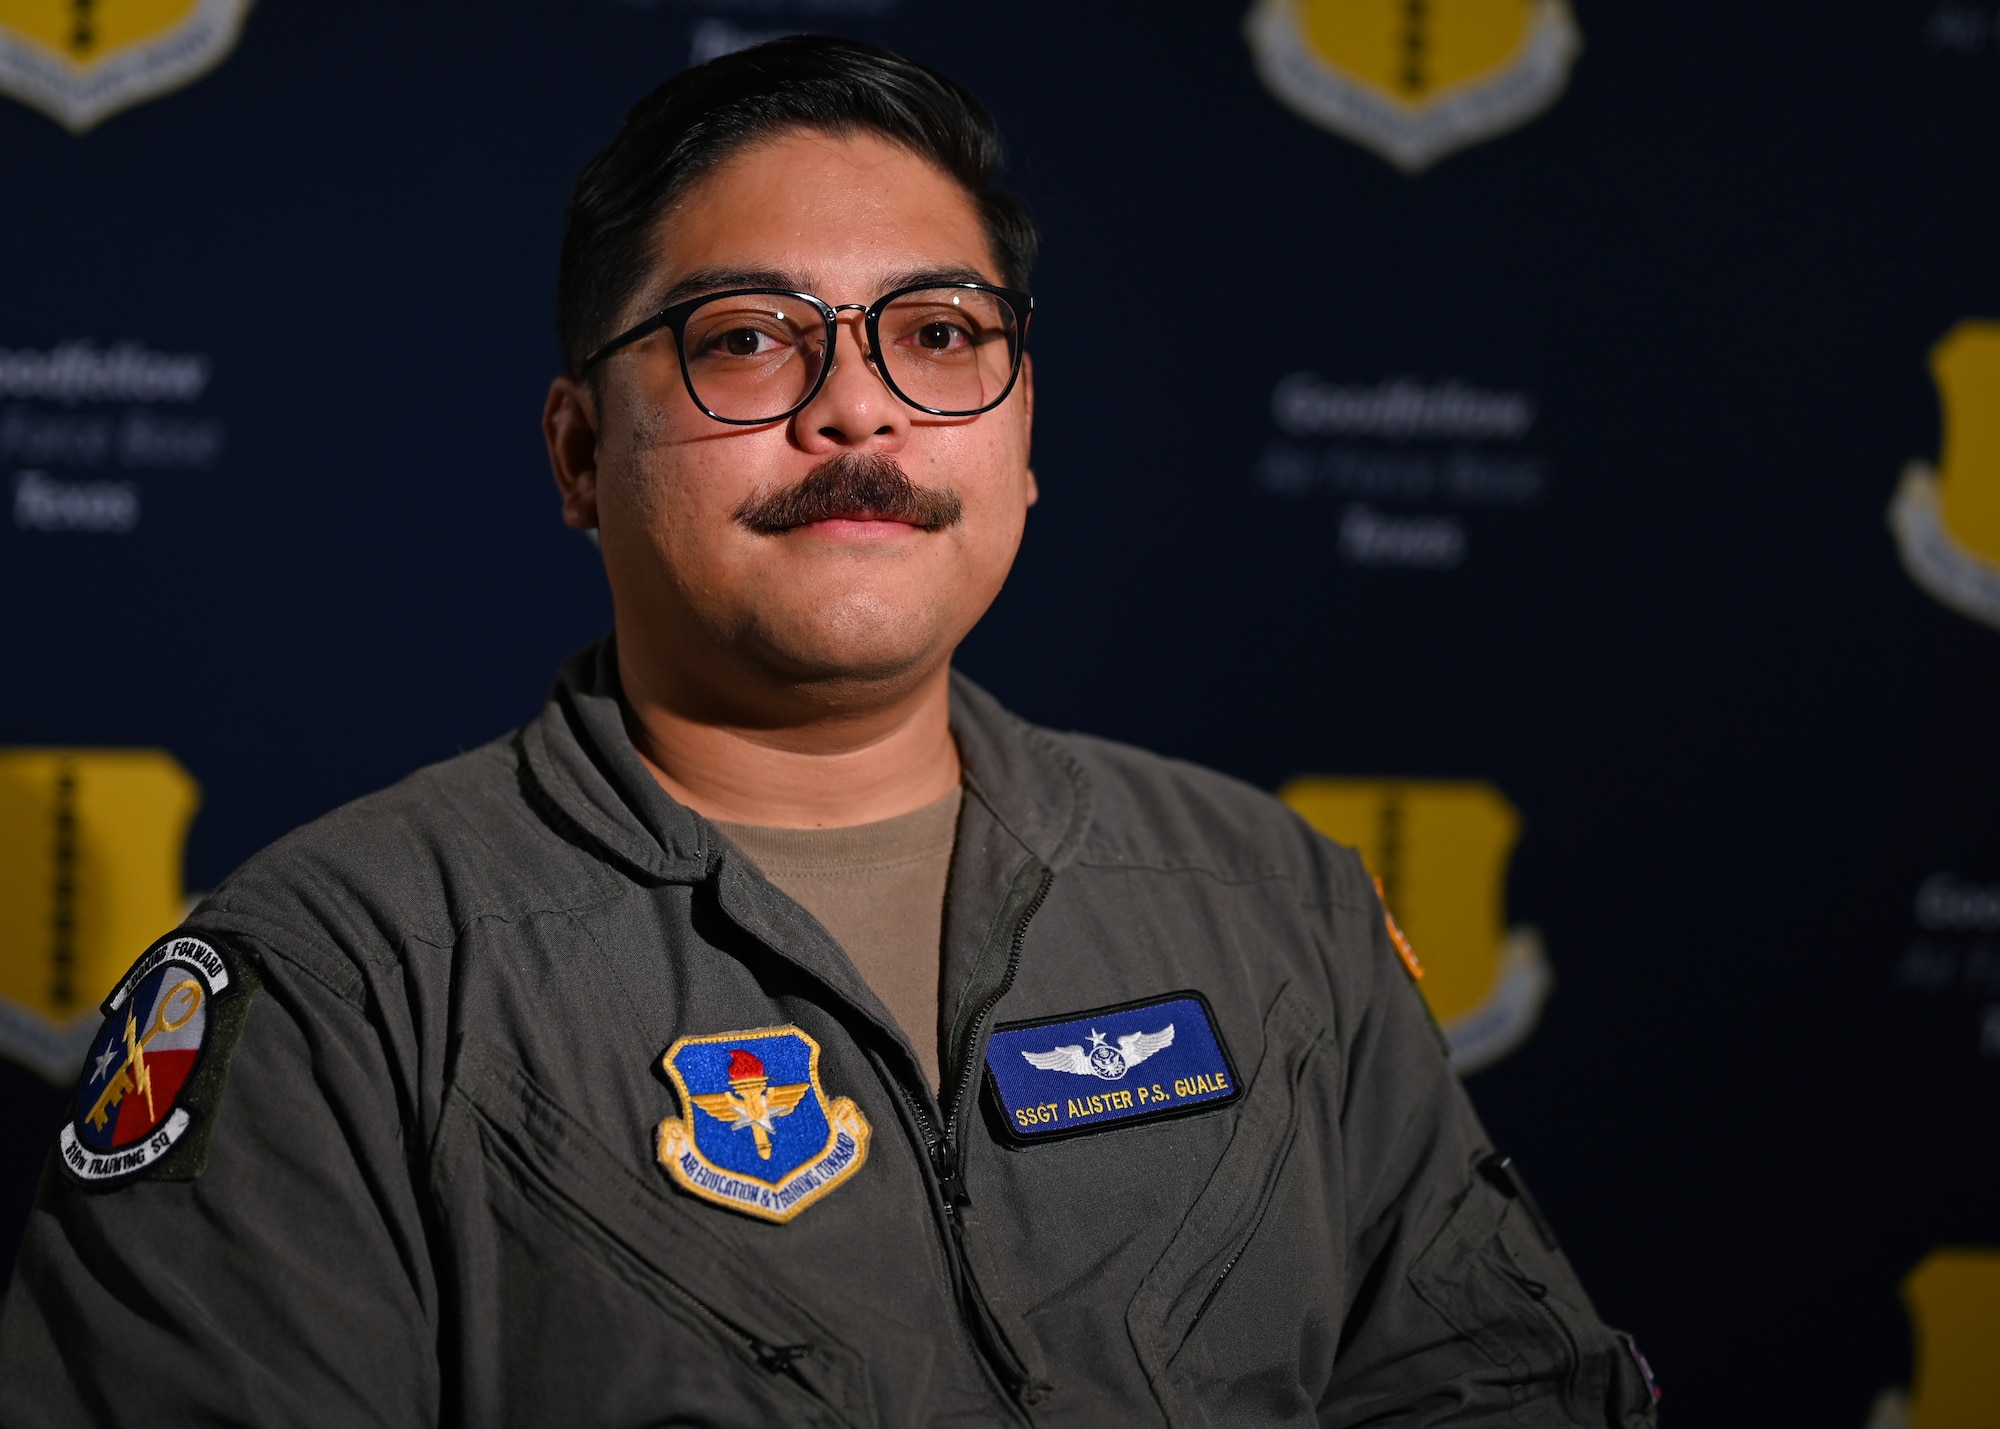 U.S. Air Force Staff Sgt. Alister Guale, 316th Training Squadron Chinese linguist instructor, poses for a photo at Goodfellow Air Force Base, Texas, May 16, 2022. Guale is half Filipino and shared his culture through food and compassion. (U.S. Air Force photo by Senior Airman Ethan Sherwood)